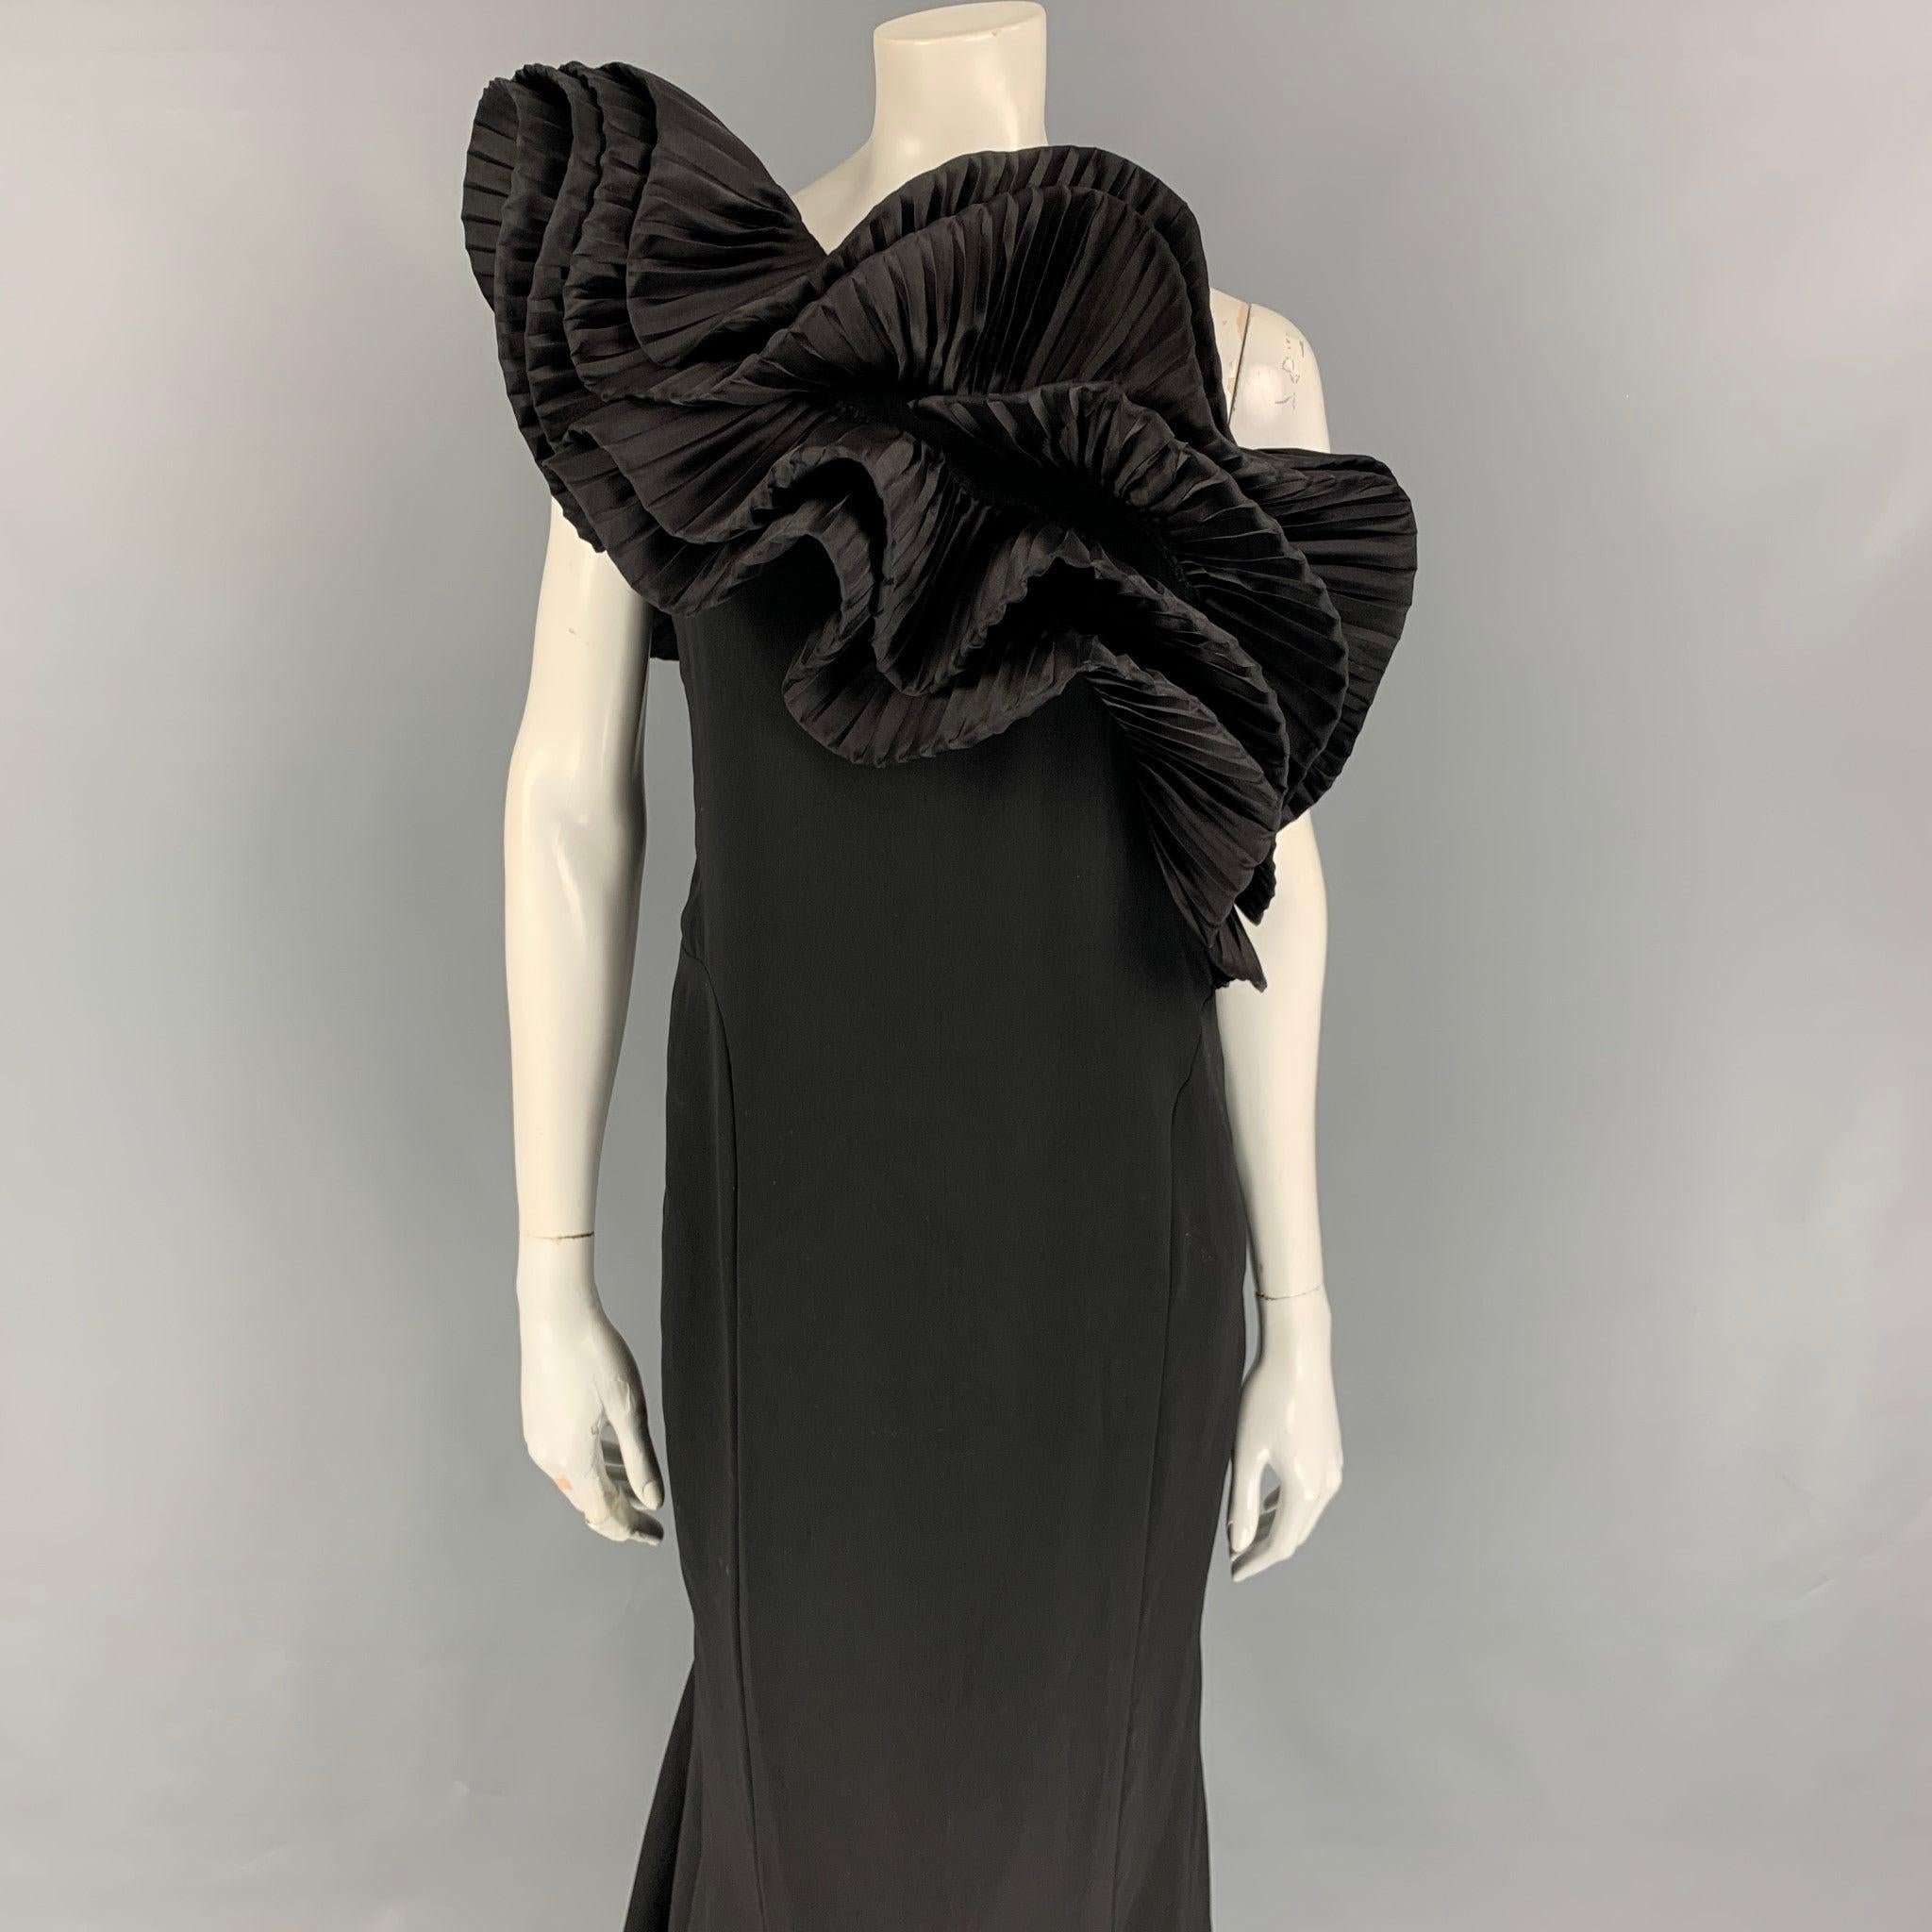 MARCHESA gown comes in a black wool with a slip liner featuring a one shoulder style, large ruffle design, sleeveless, snap button details, and a side zipper closure.
Very Good
Pre-Owned Condition. Fabric tag removed. 

Marked:  Size tag removed.